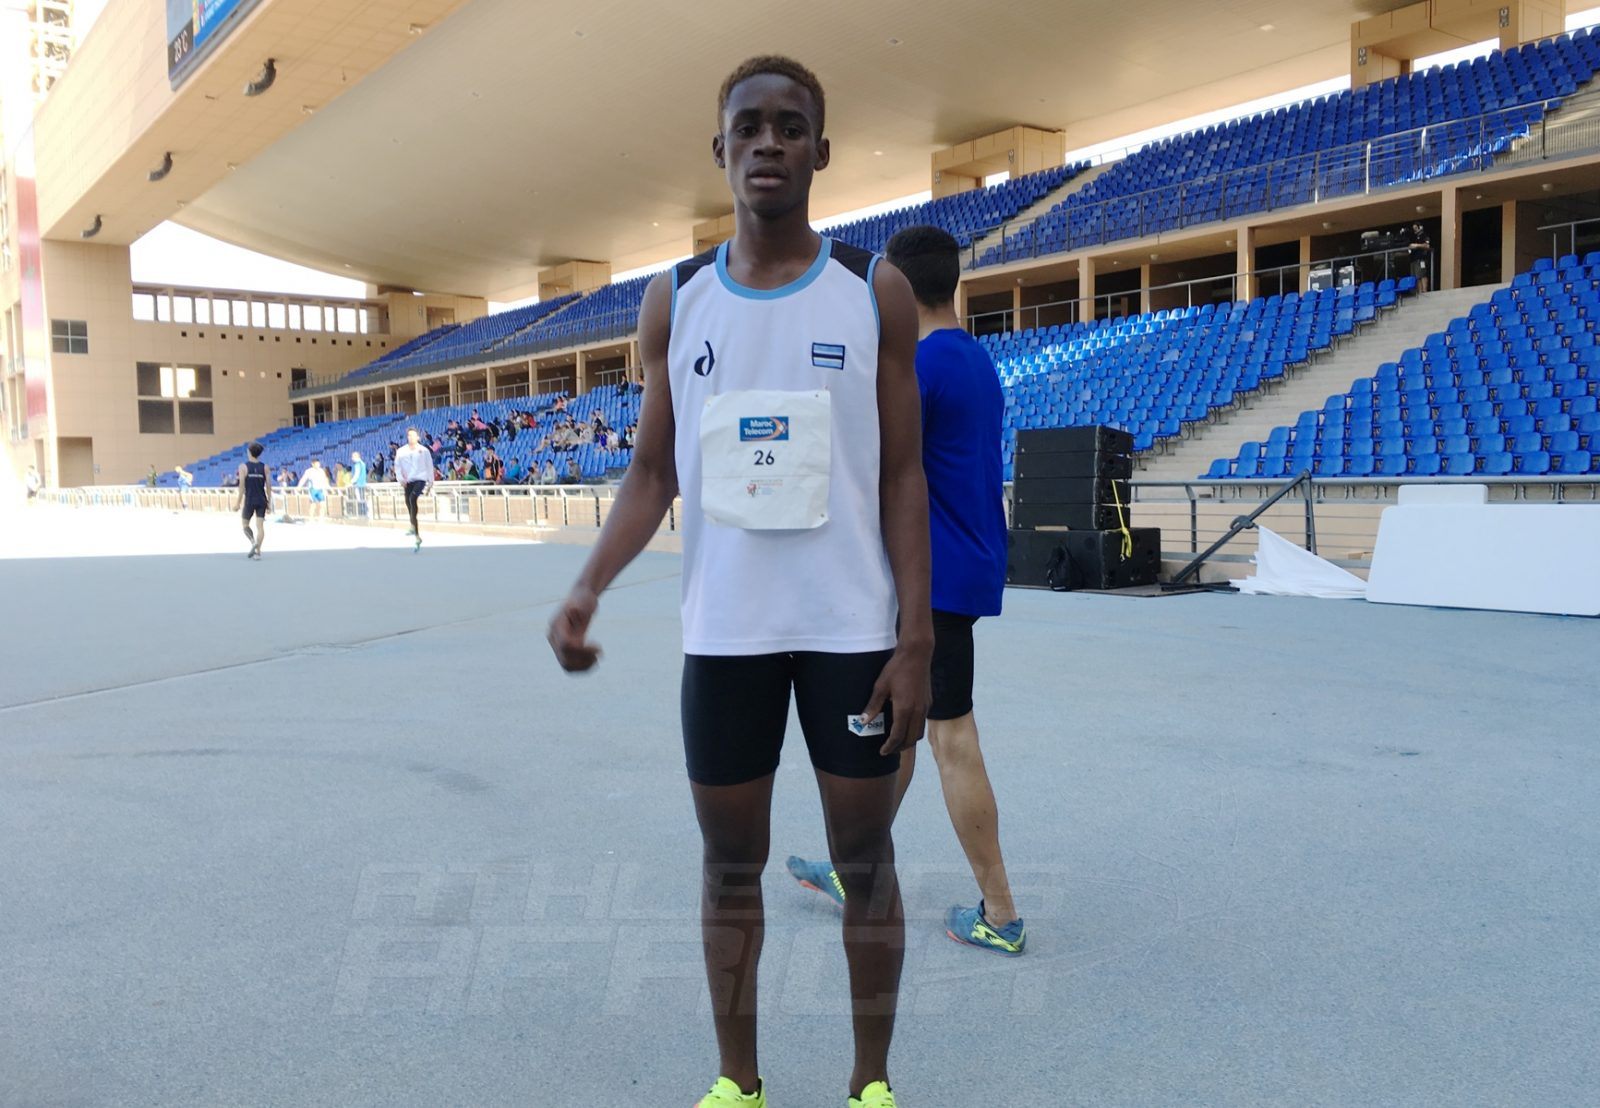 Bernard Olesite of Botswana after winning the boys 400m at the Gymnasiade 2018 in Marrakech / Photo Credit: Yomi Omogbeja